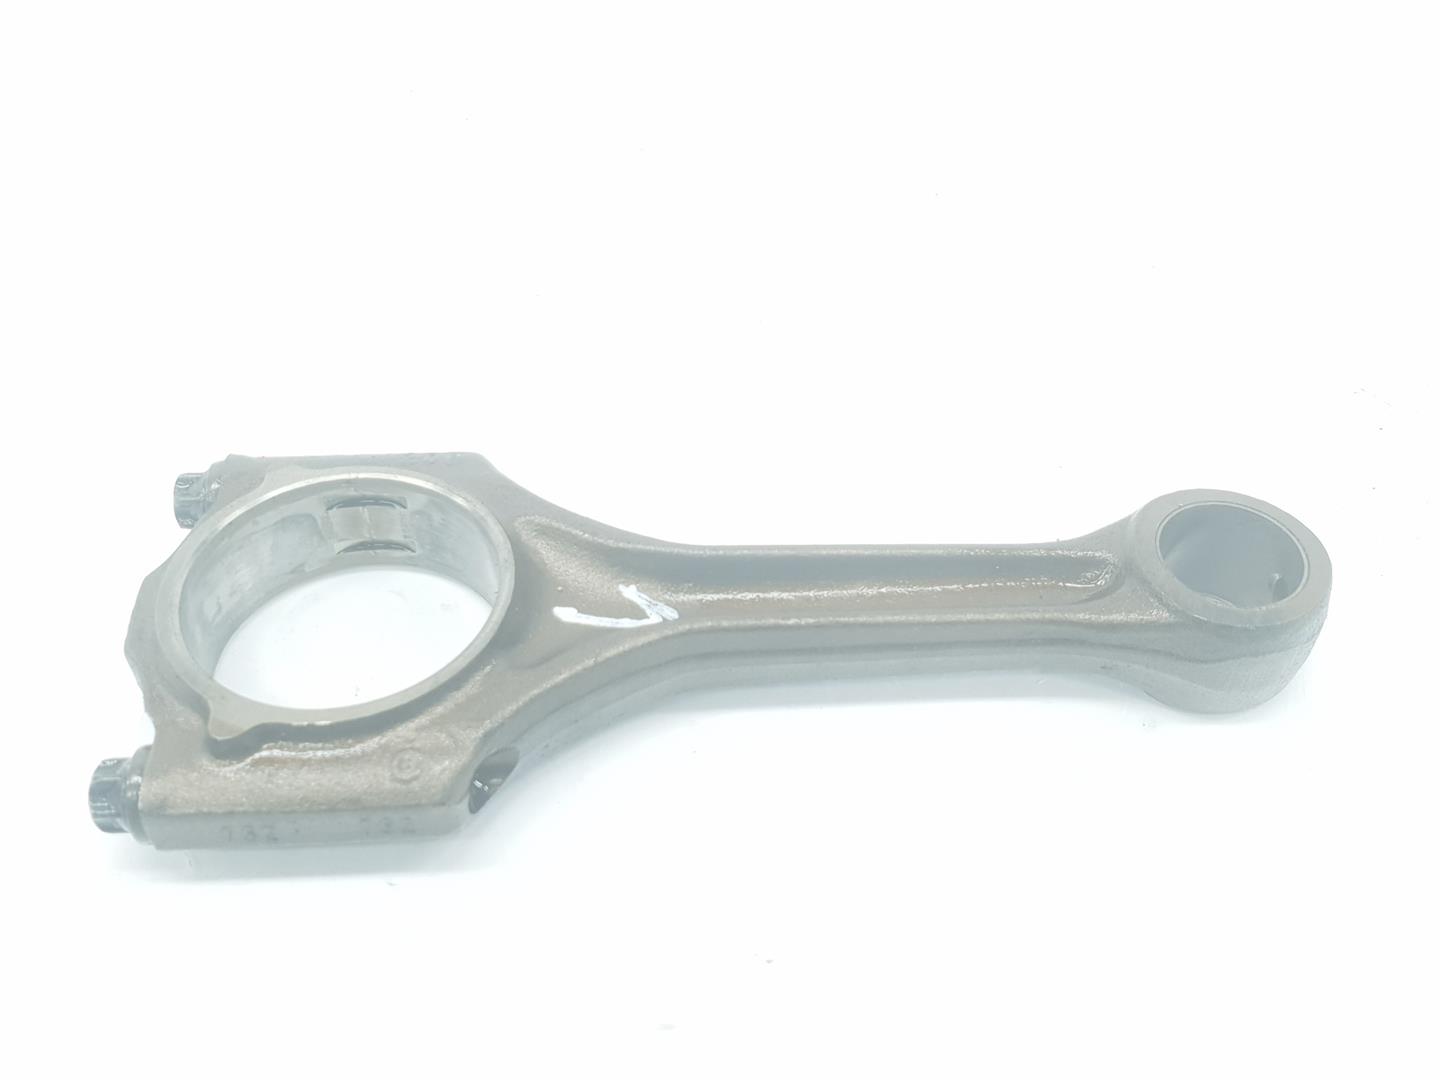 BMW 3 Series E36 (1990-2000) Connecting Rod 11241437617, 11241437617, 1111AA 24233759